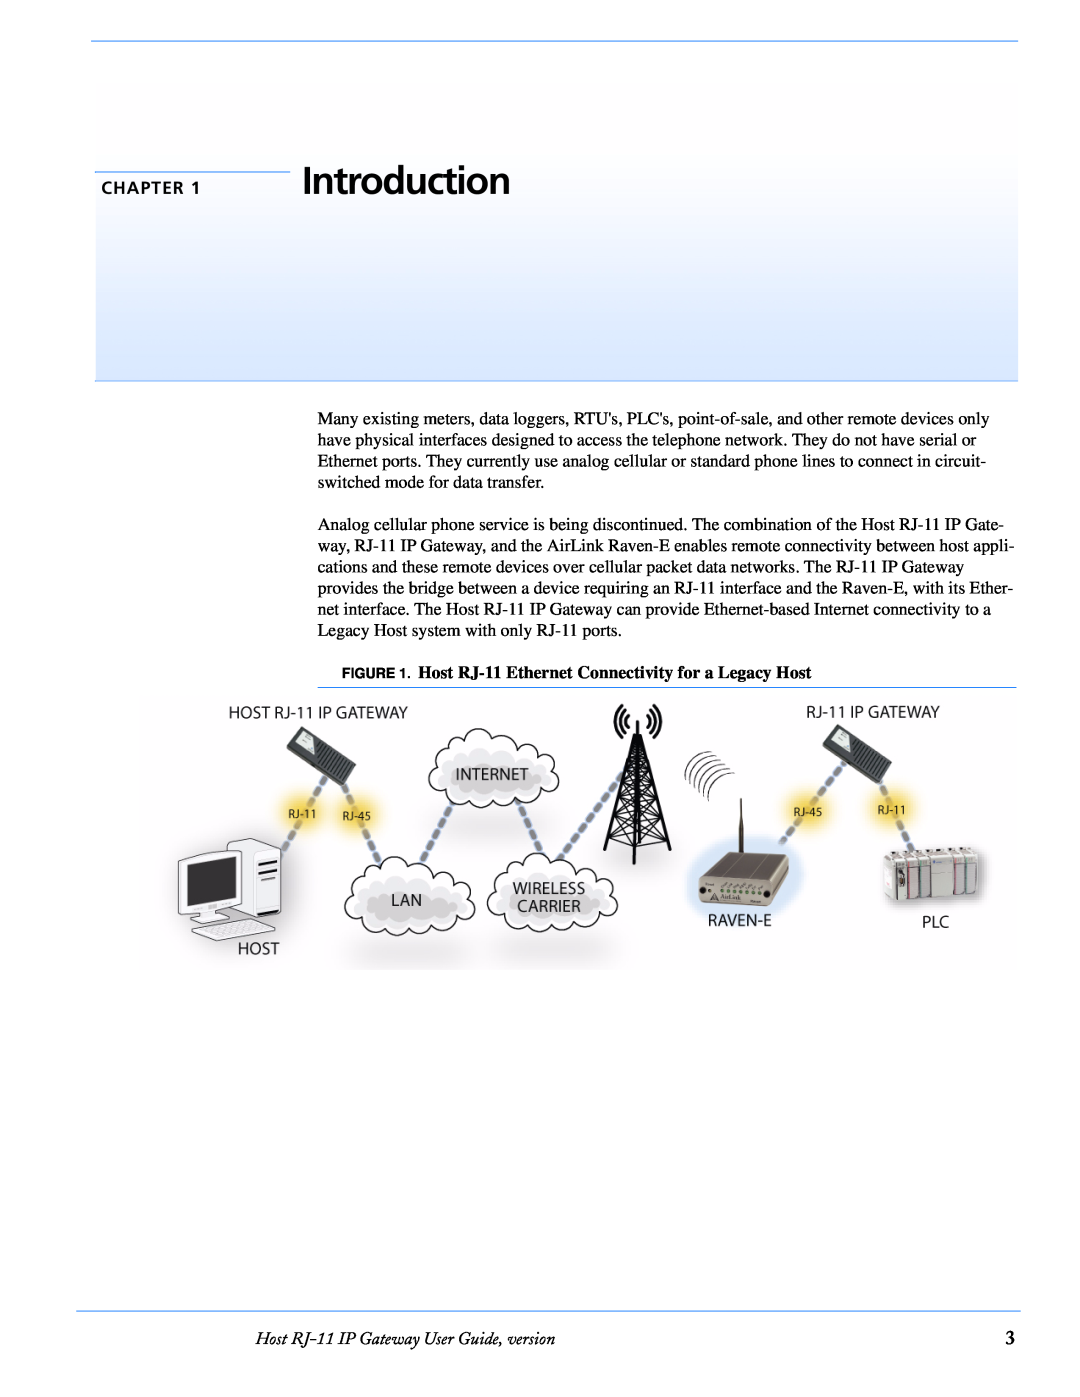 Airlink manual Introduction, Chapter, Host RJ-11 Ethernet Connectivity for a Legacy Host 